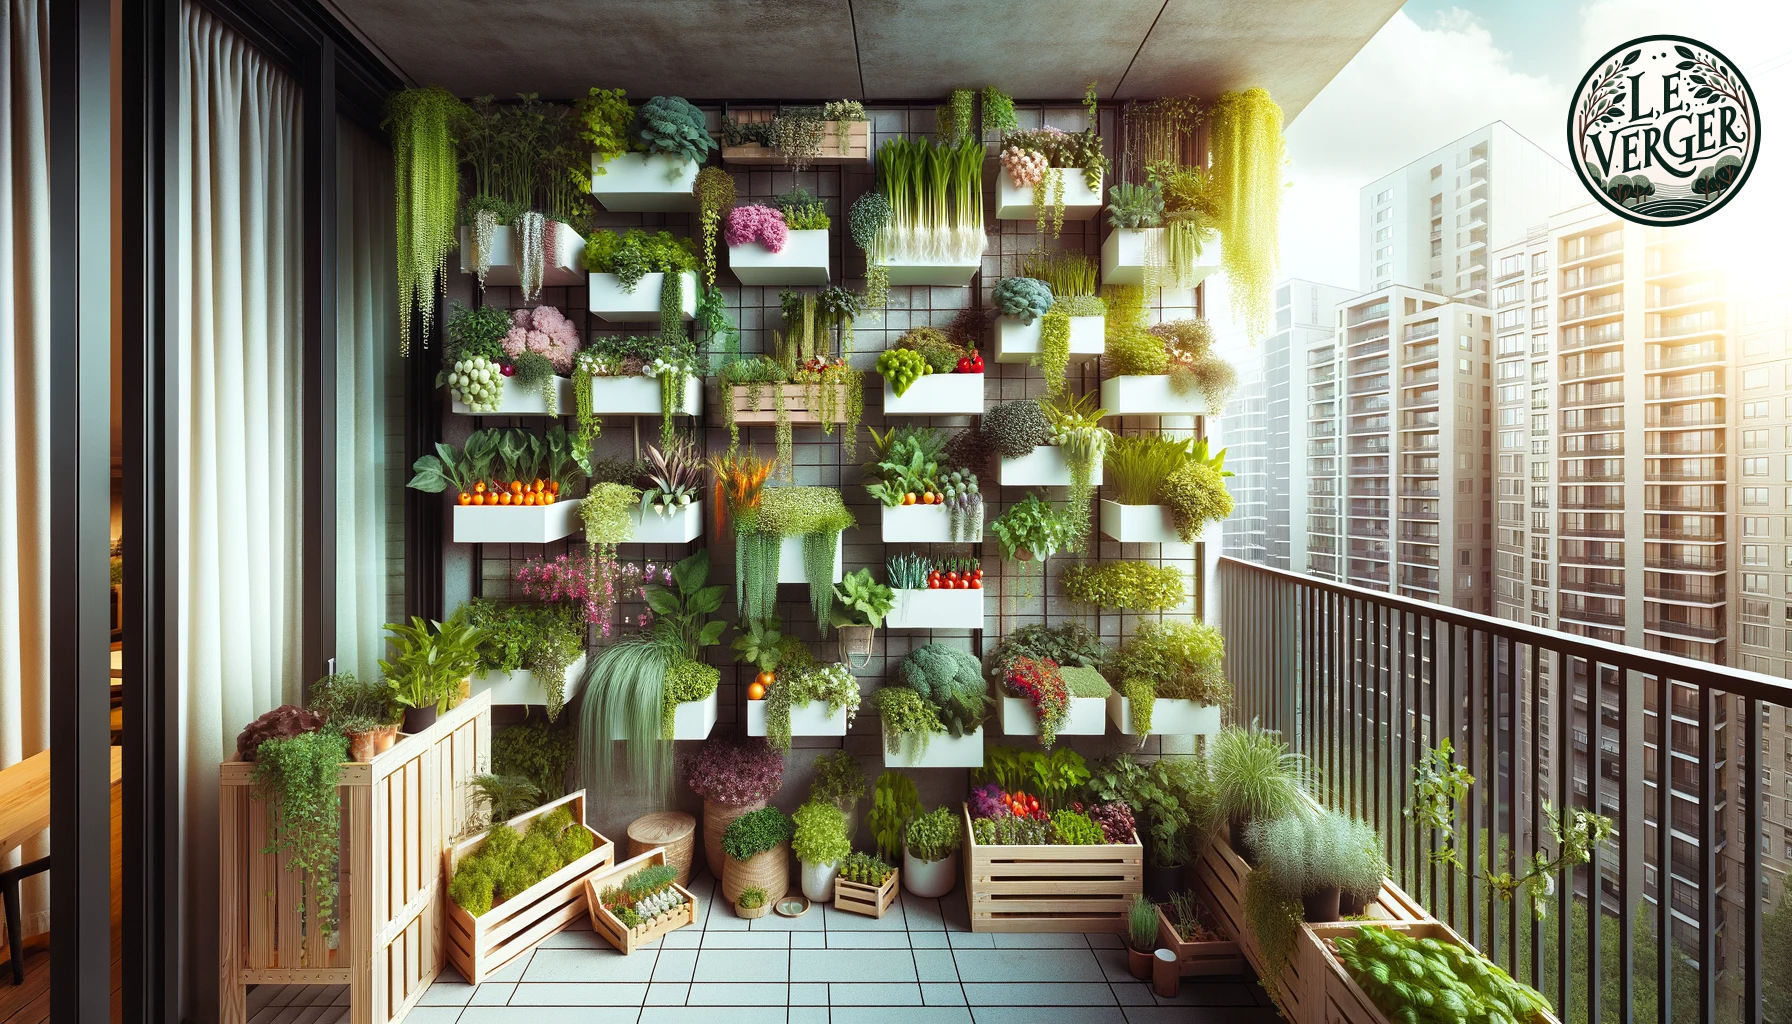 Photo: A modern urban balcony filled with a variety of plants growing vertically on wall-mounted planters and trellises. Among the foliage, there are flowers, herbs, and even some vegetables.